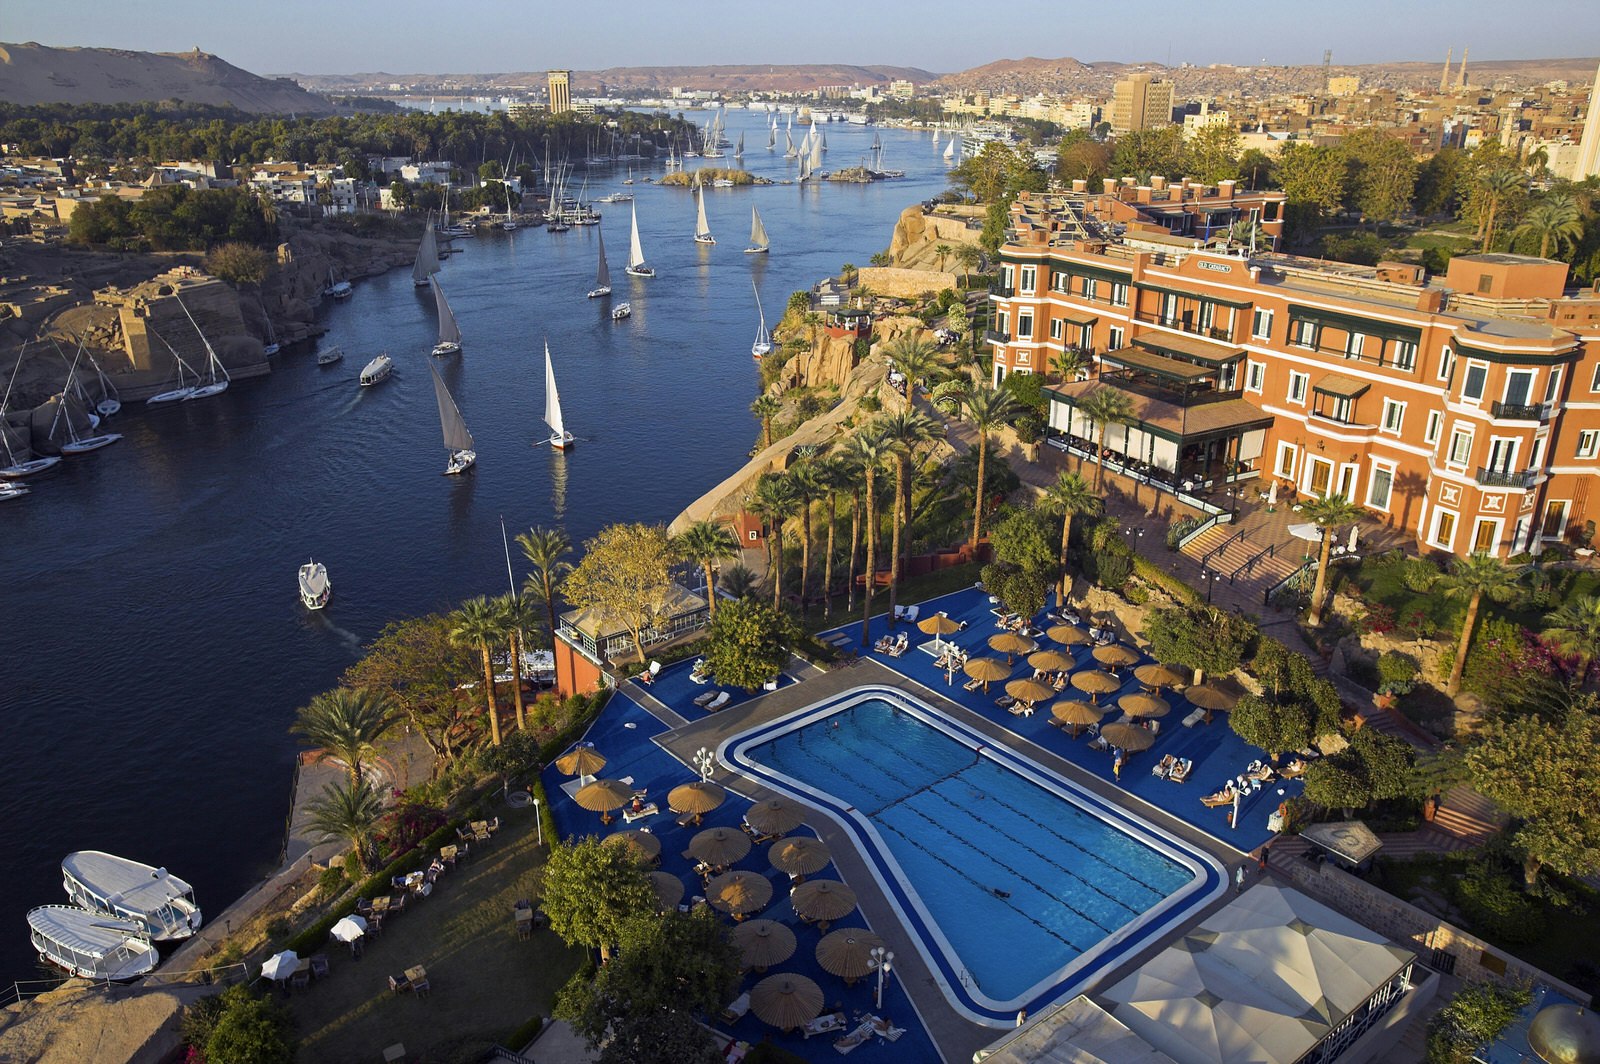 View across the Nile at Aswan in the late afternoon. In the foreground is the Old Cataract Hotel, made famous when Agatha Christie wrote Death on the Nile while staying there. Image by Julian Love / Getty Images